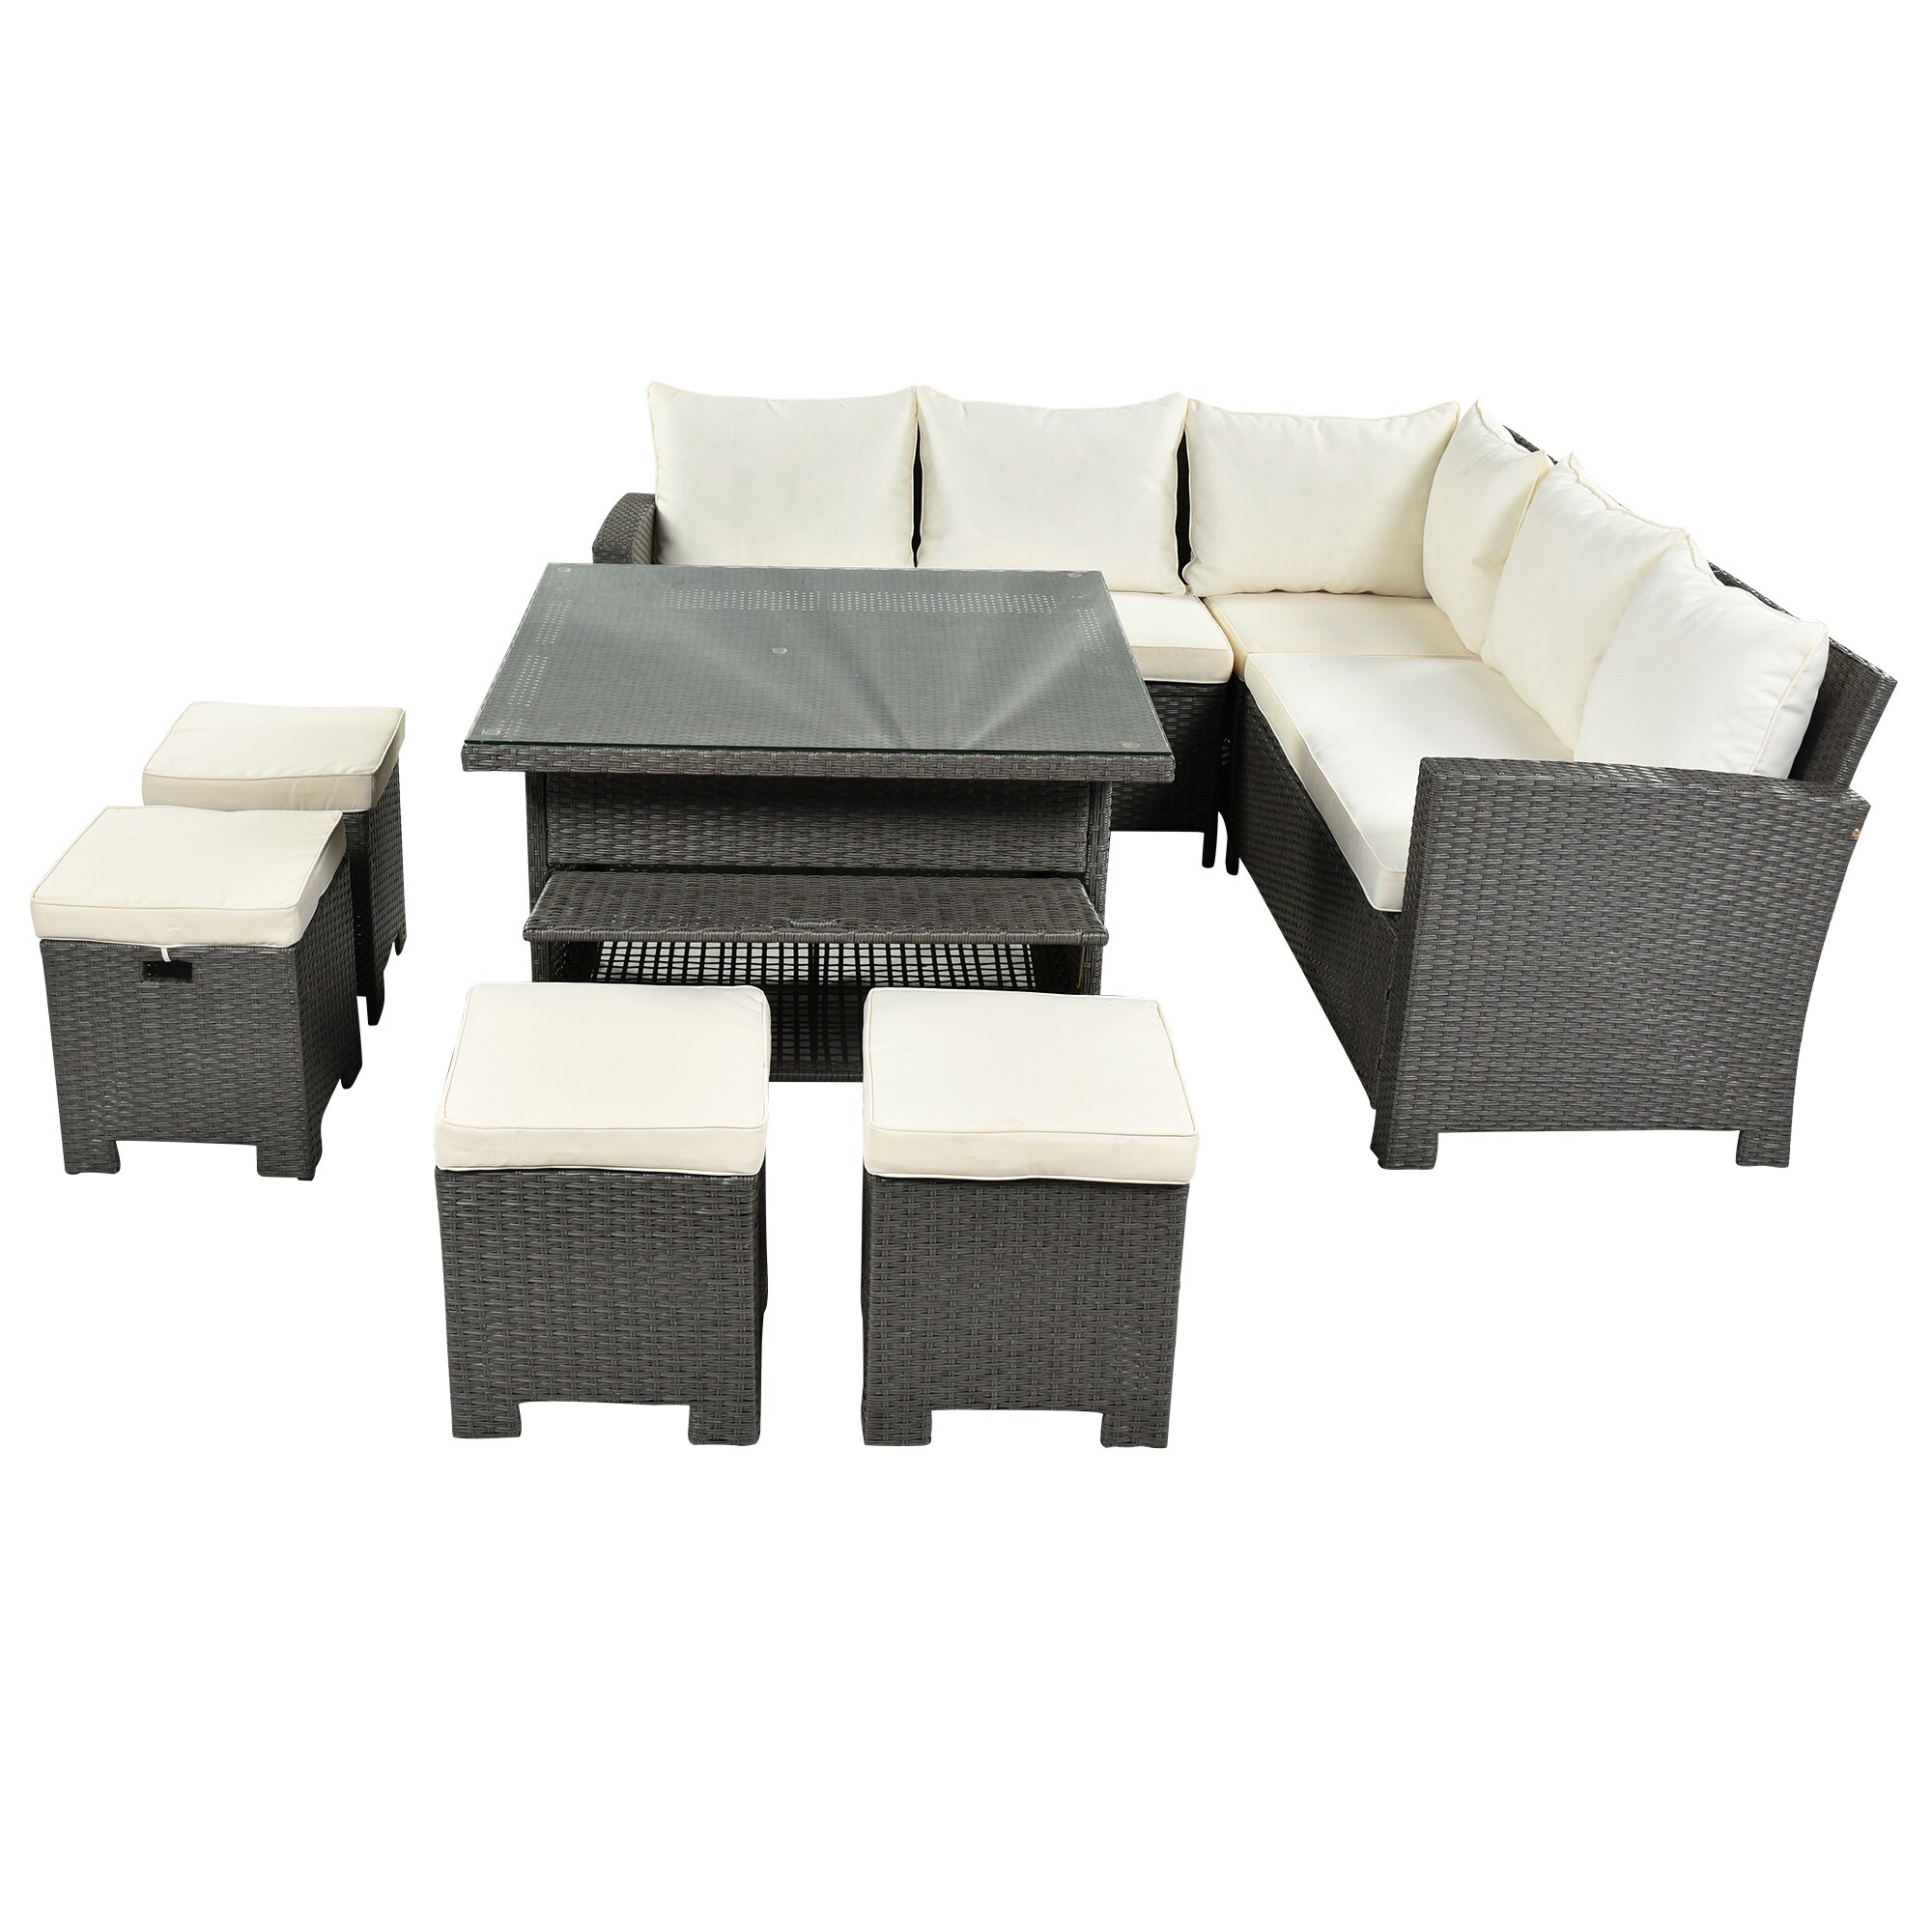 Outdoor Furniture Garden Sofas Patio Furniture Set 8 Piece Outdoor Conversation Set Dining Table Chair With Ottoman Cushions 4